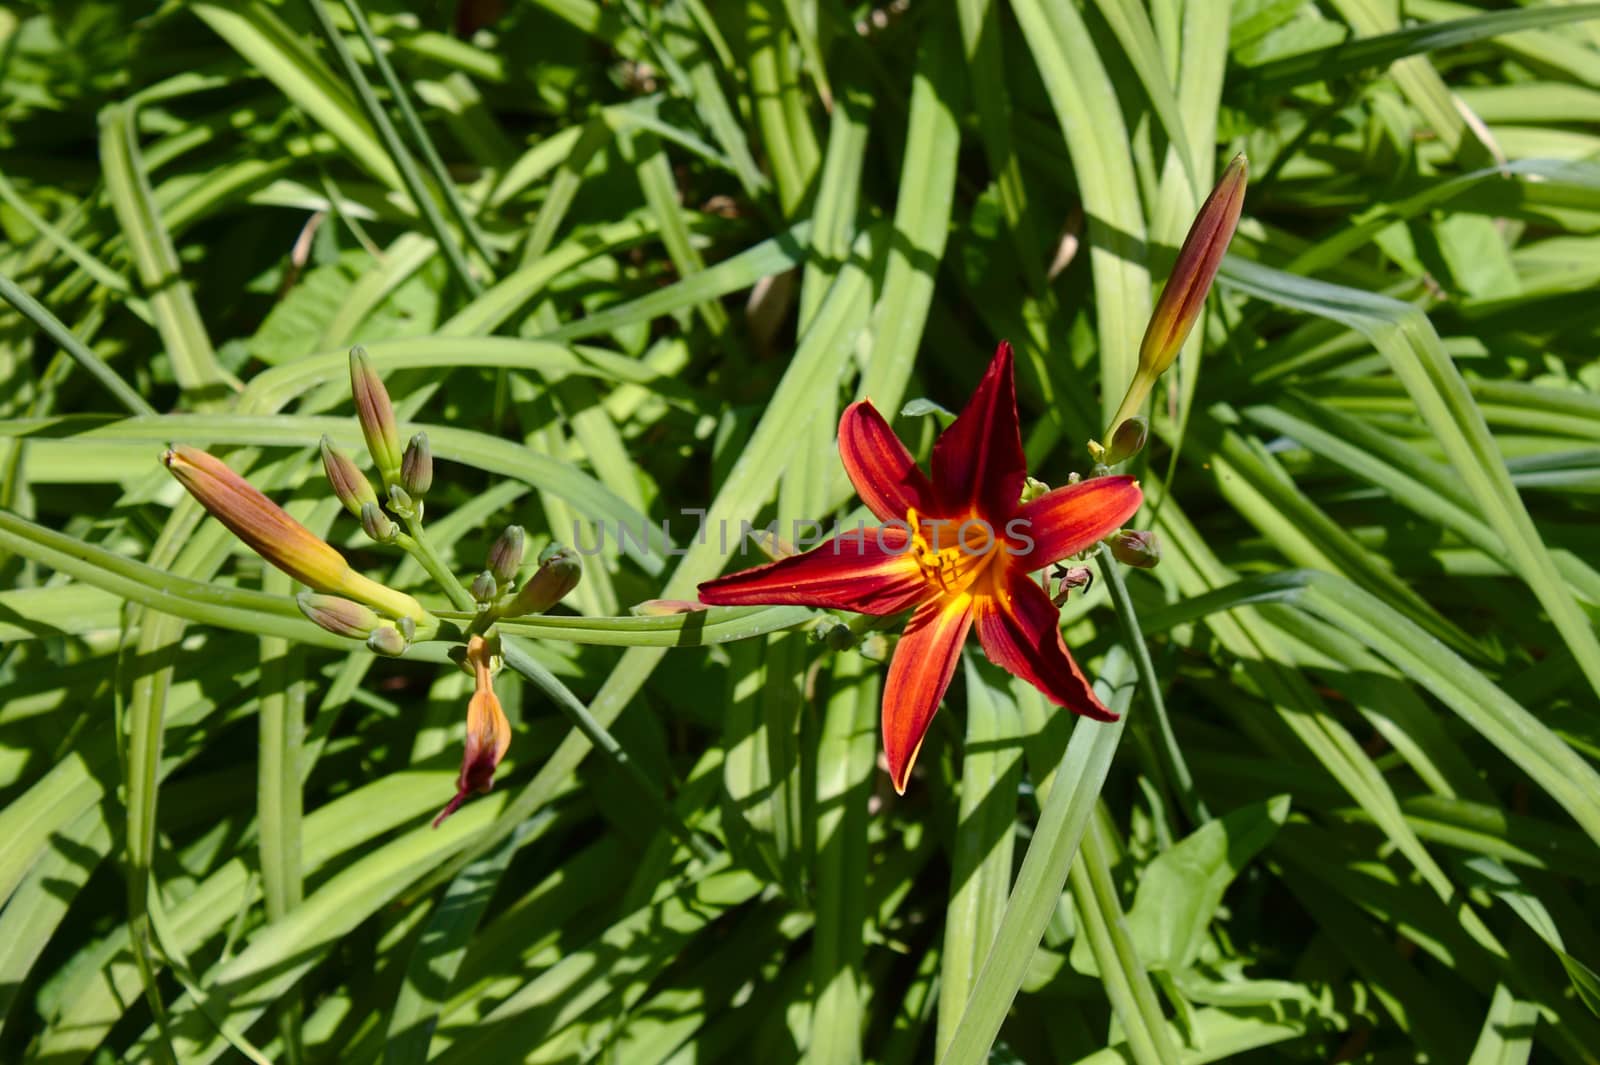 The picture shows red lily flowers in the garden